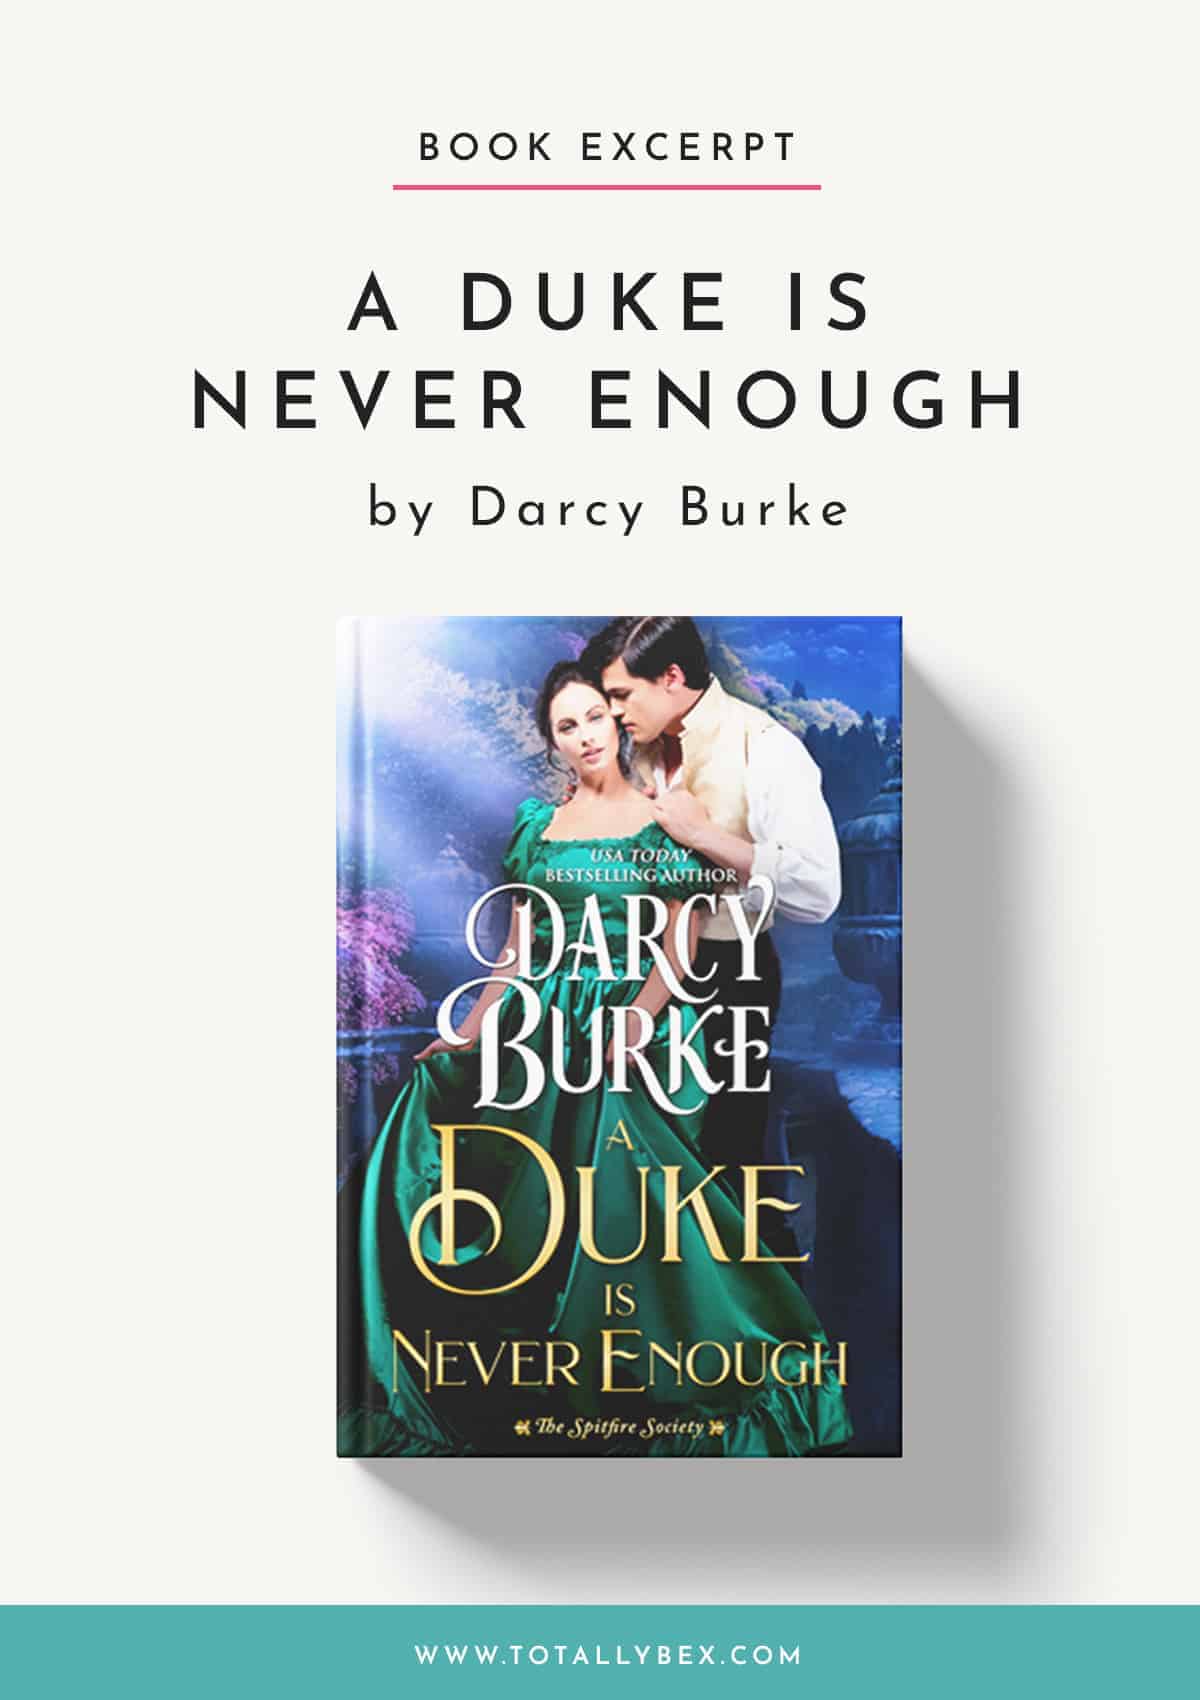 A Duke is Never Enough by Darcy Burke – A Murder, A Spinster, and a Rake!